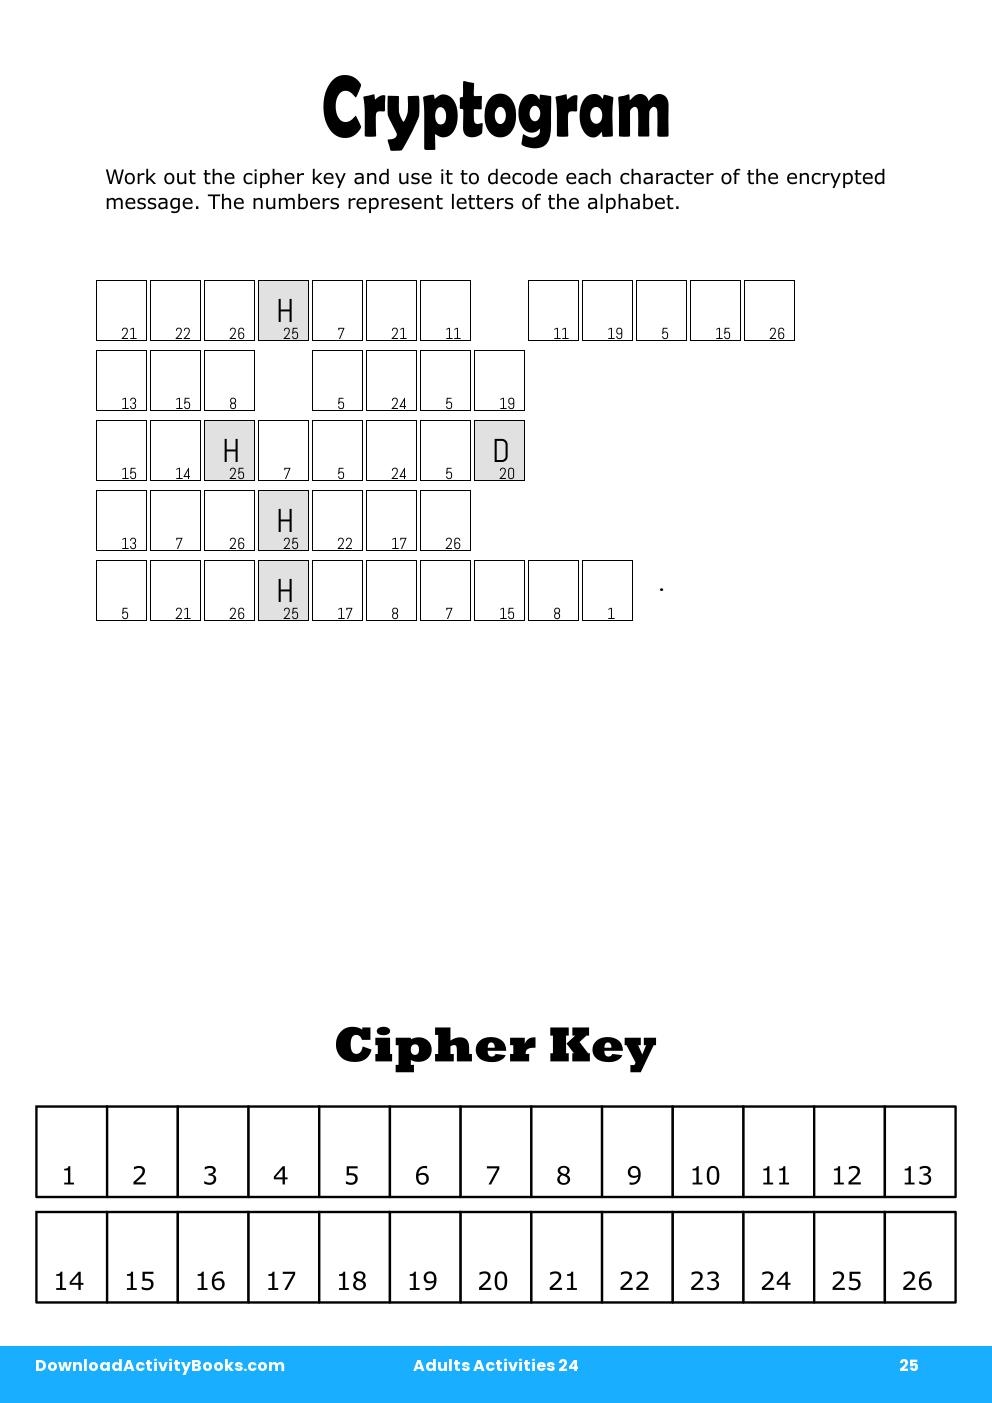 Cryptogram in Adults Activities 24